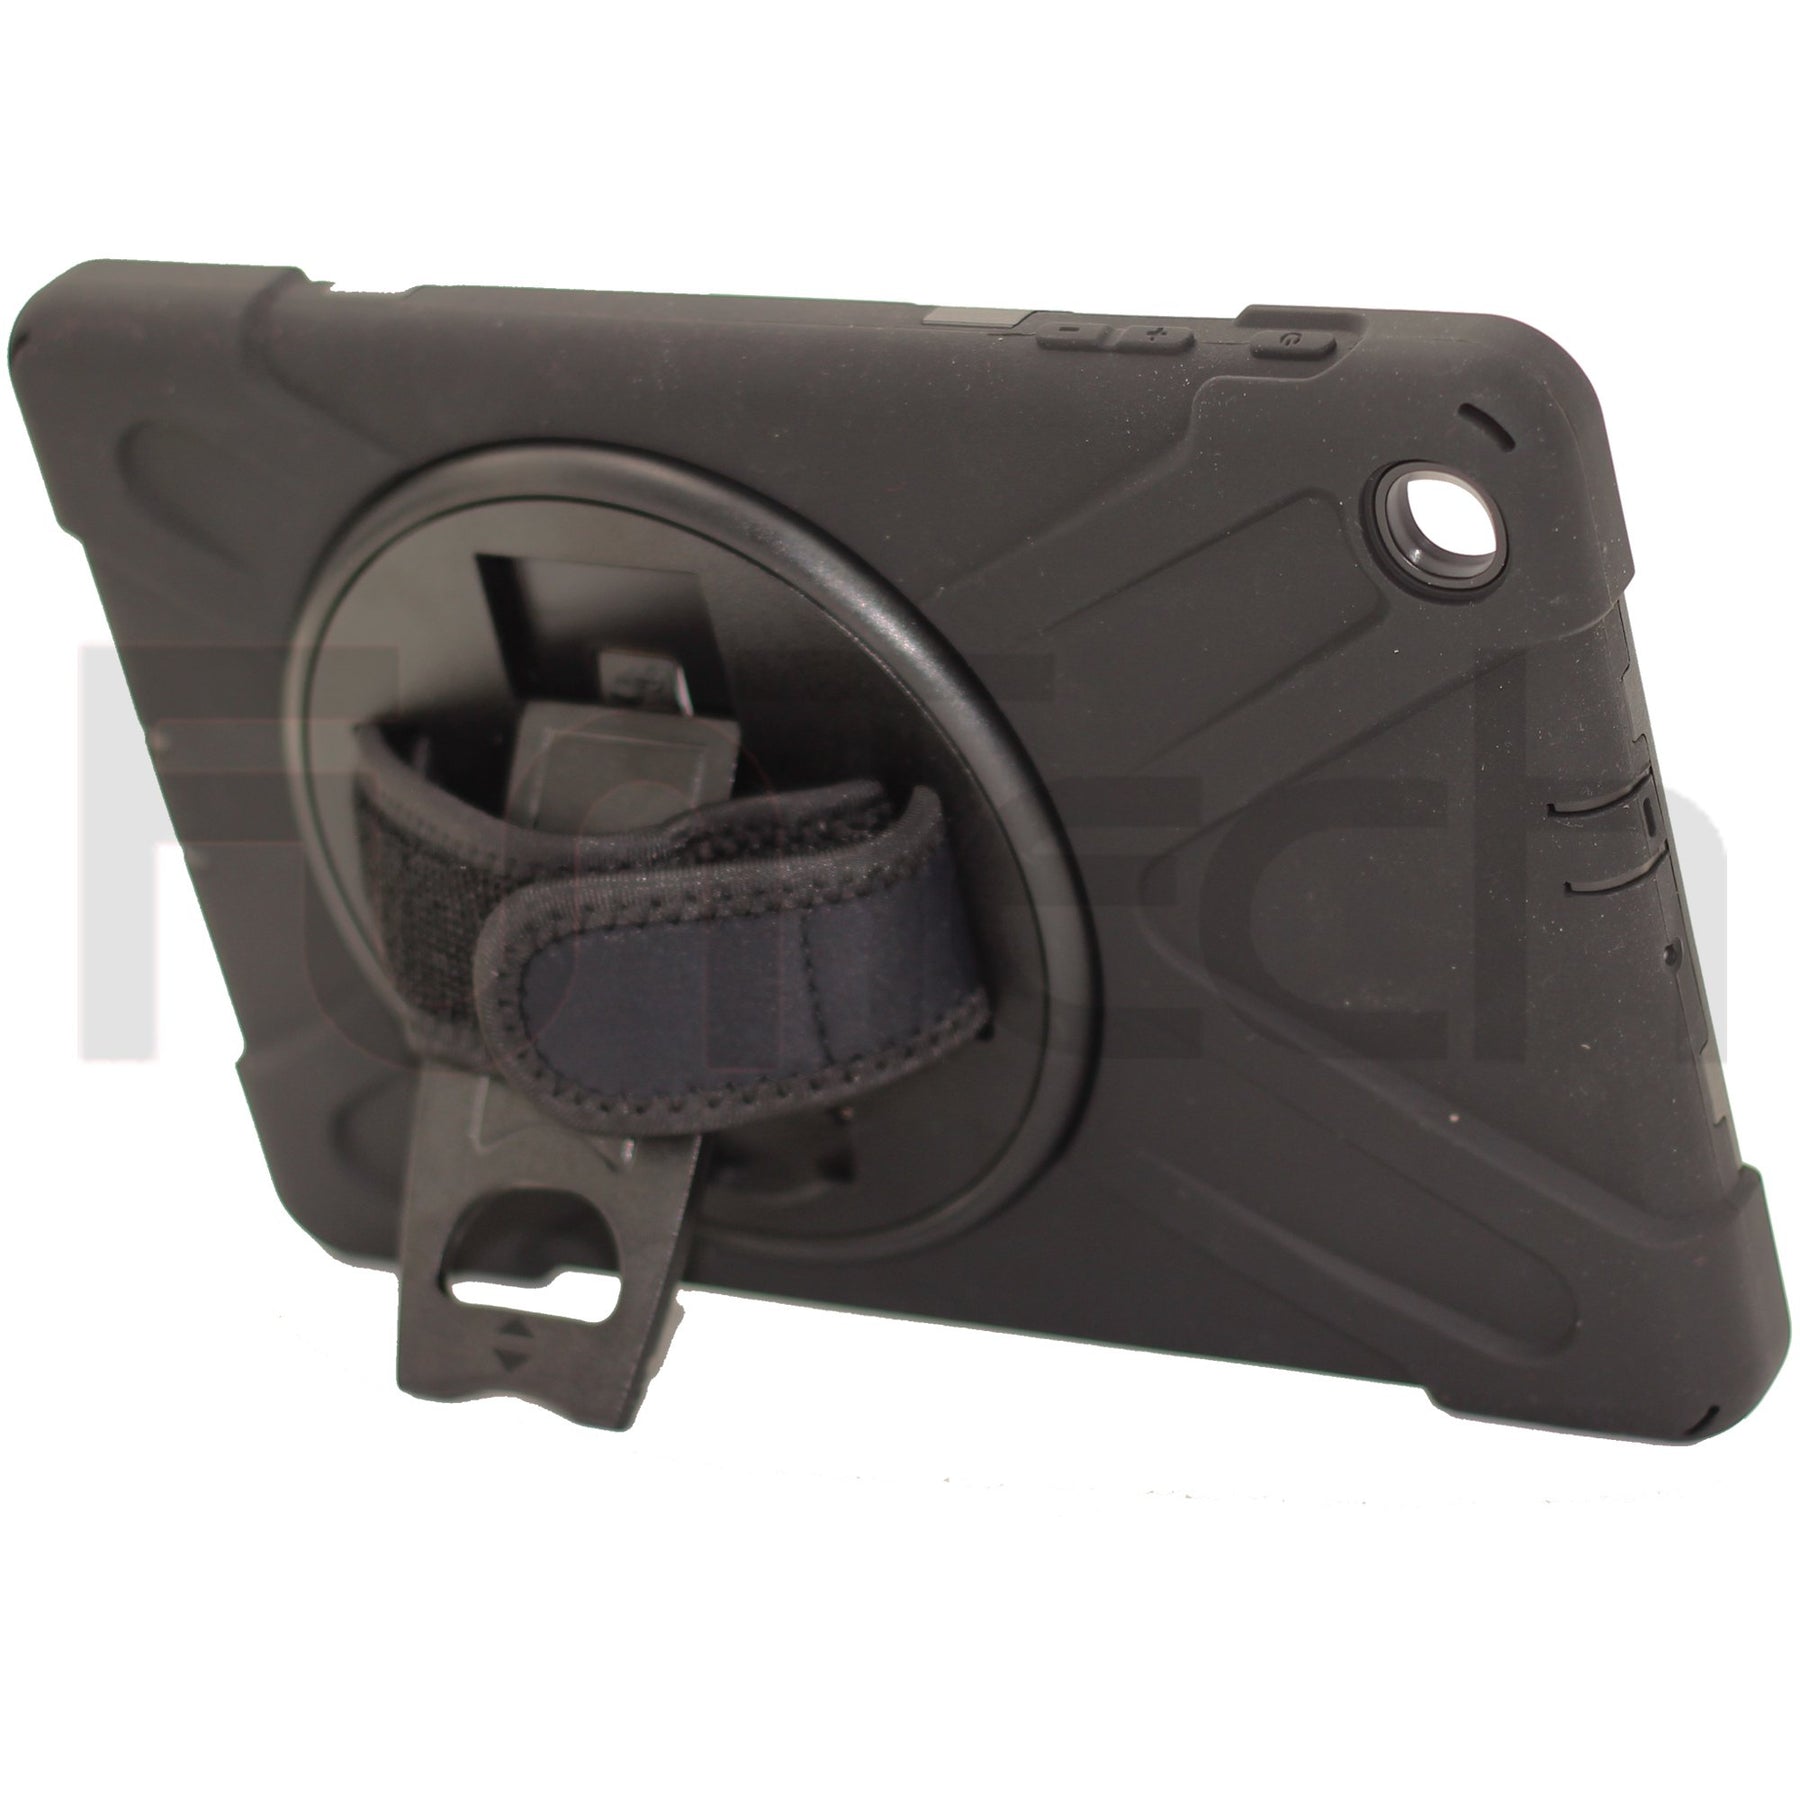 Drop & Shock Proof Samsung Tab Case For - A10.1" (2019) T510/T515 Black